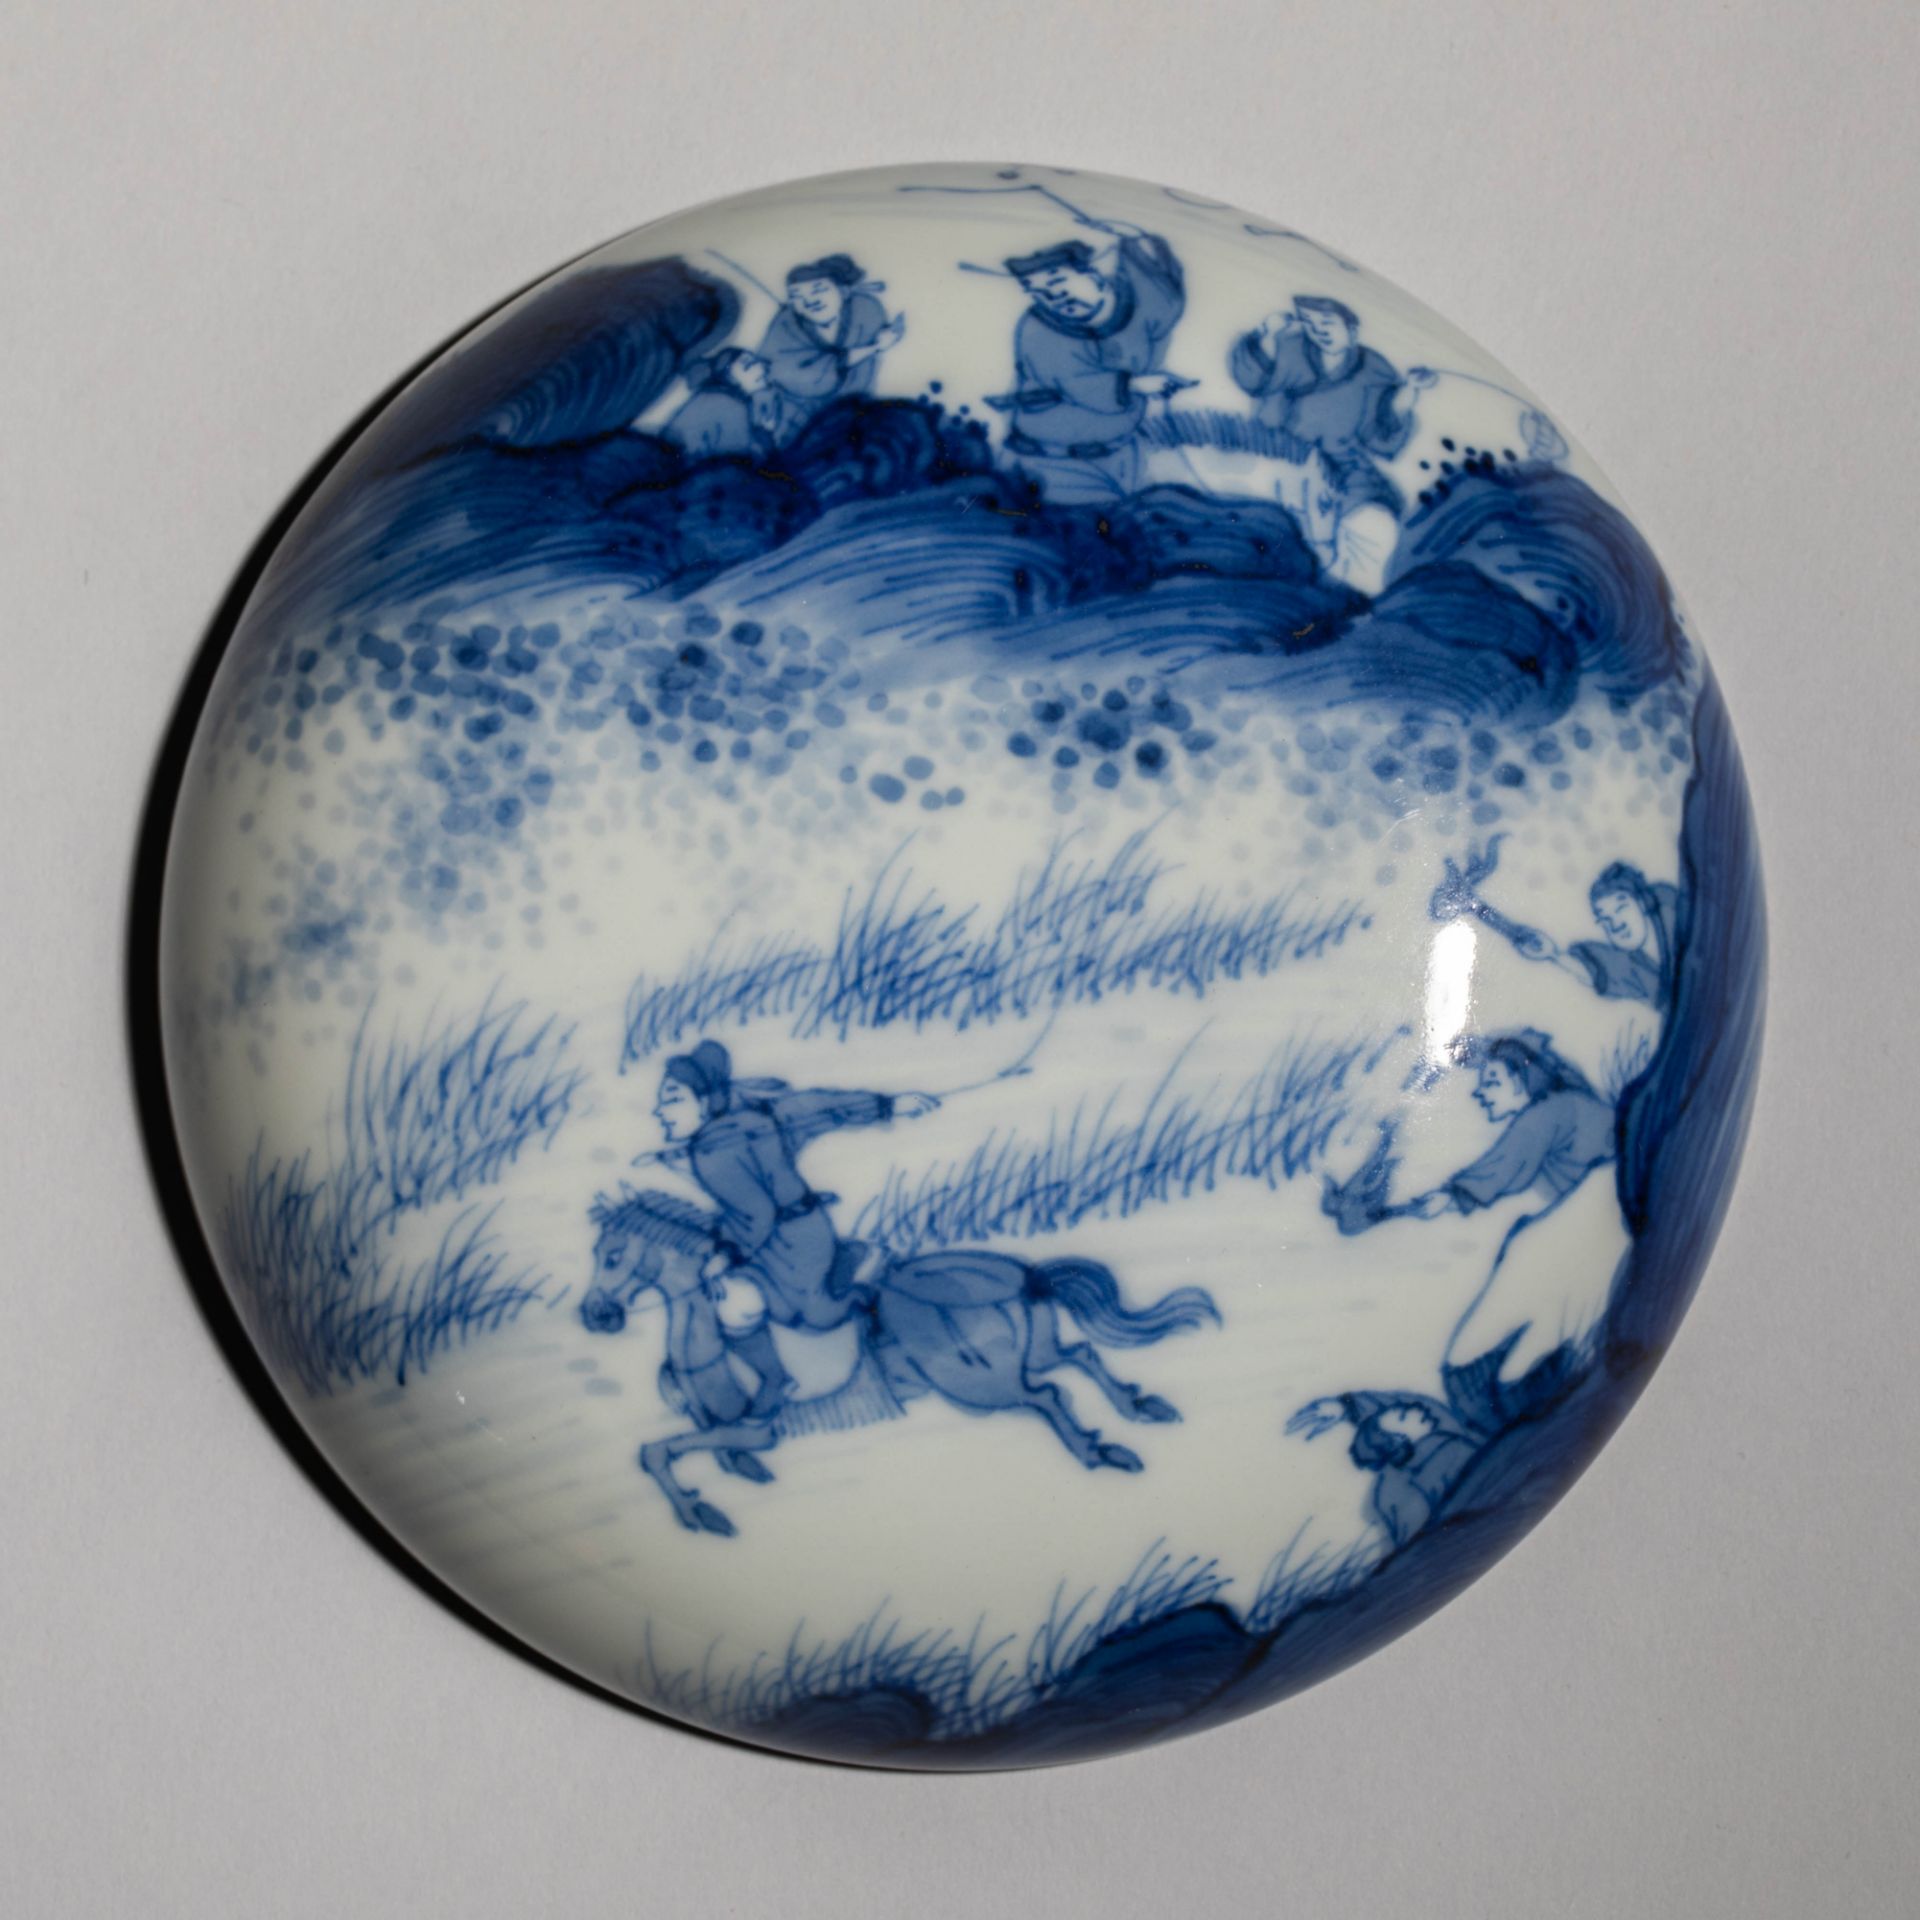 Qing Dynasty, China, Kangxi period, Chenghua style blue and white ink pad box - Image 6 of 9